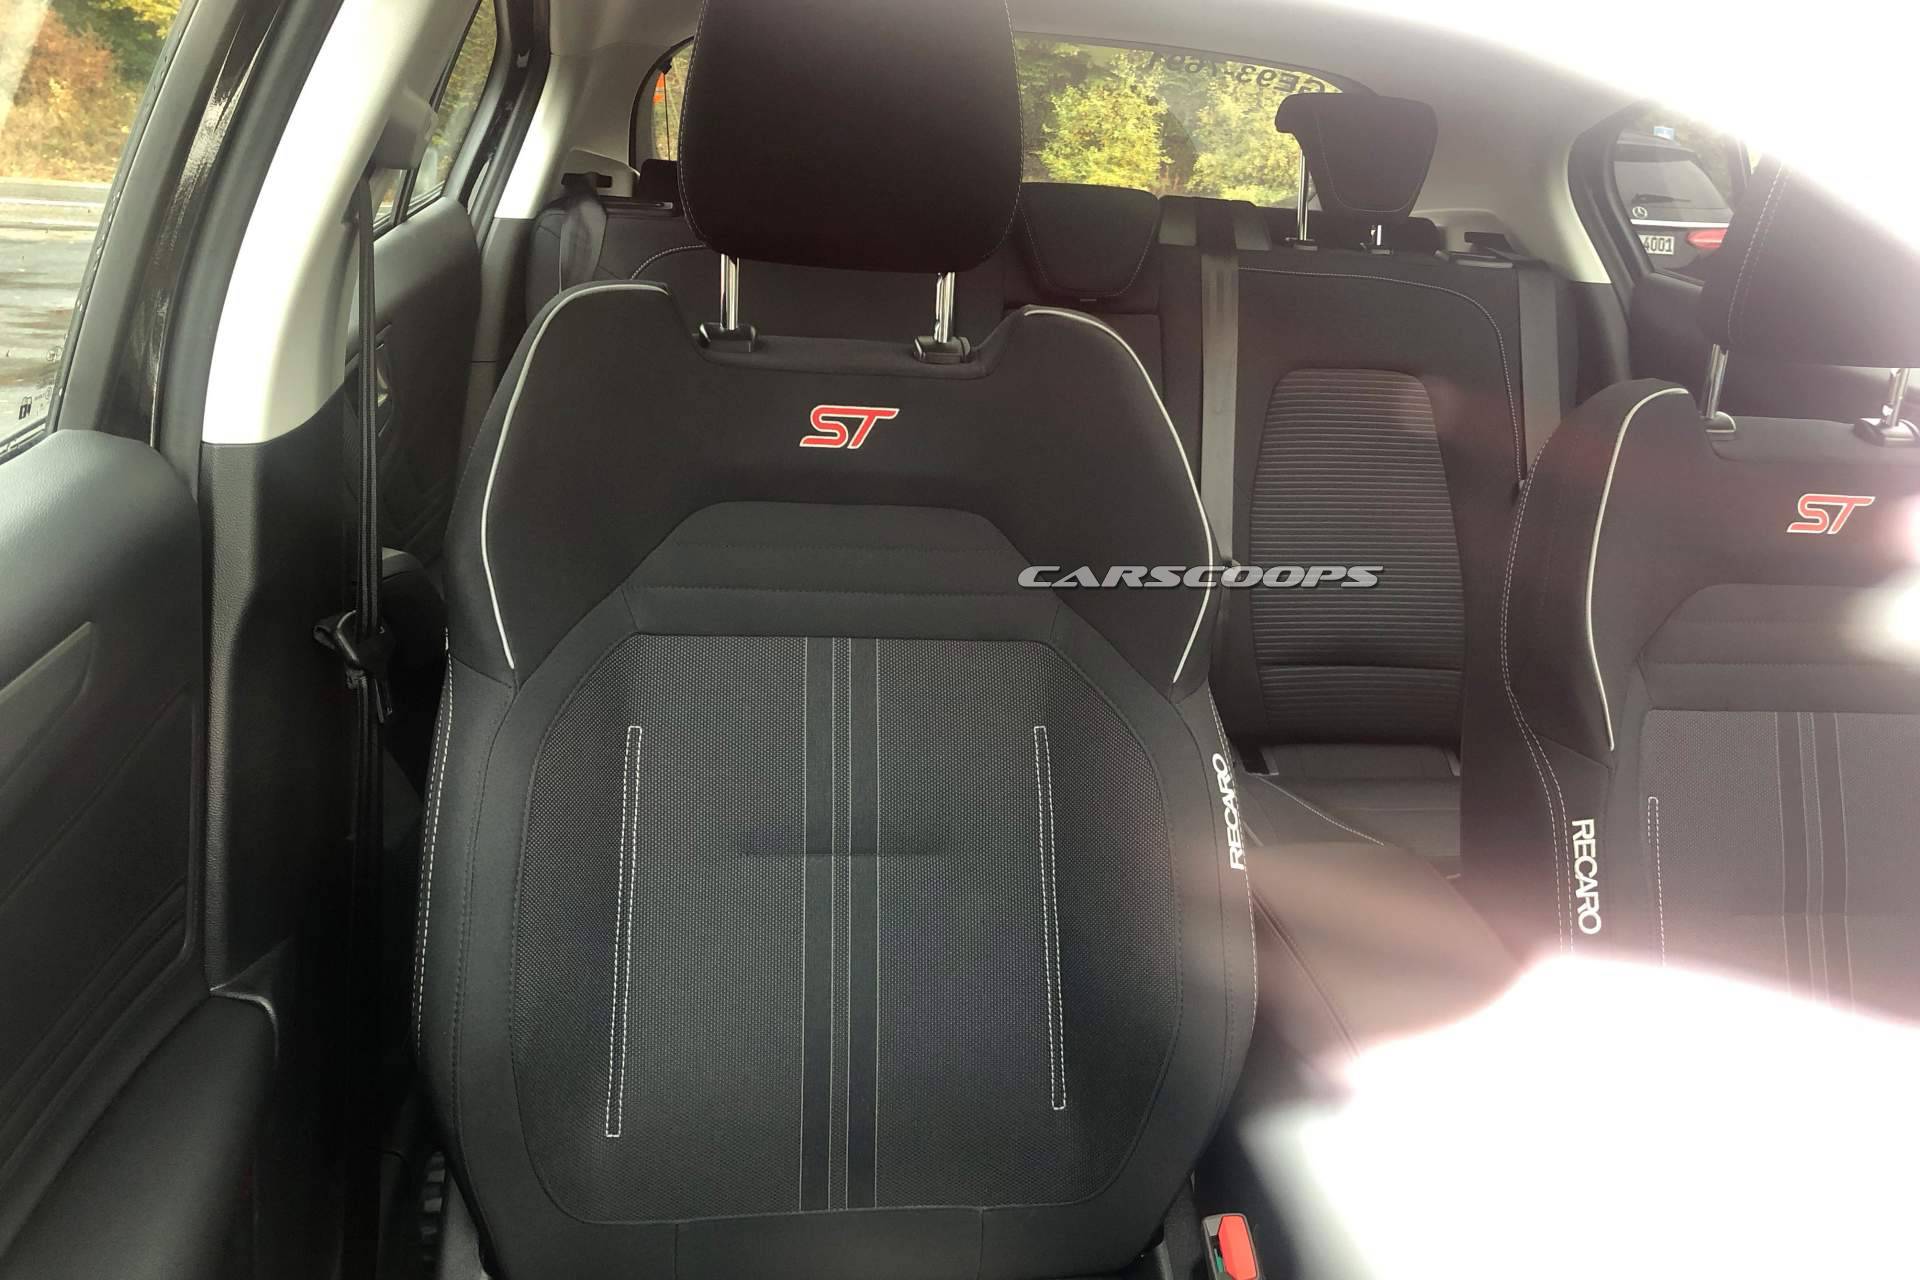 2019 Ford Focus St Here It Is In Production Form Interior